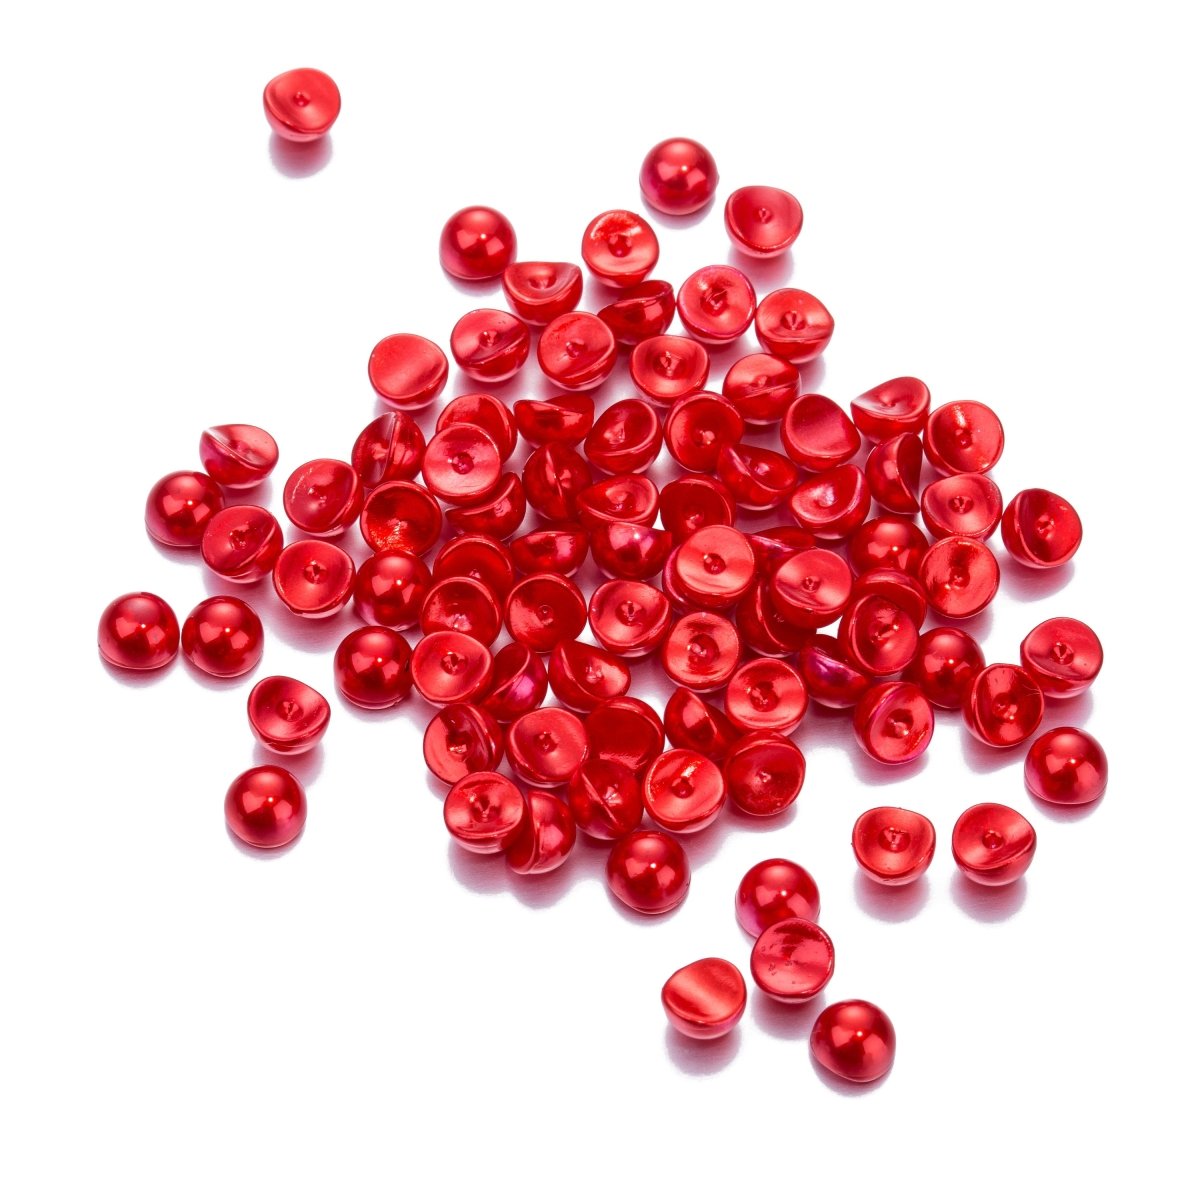 100 pcs Red Pearl Flatback Resin Decoden Cabochons, Half Round Pearls, Half Pearl Cabochons, Flat Pearl Size 6 mm for embellishments, arts, 04.30-9731 - DLUXCA